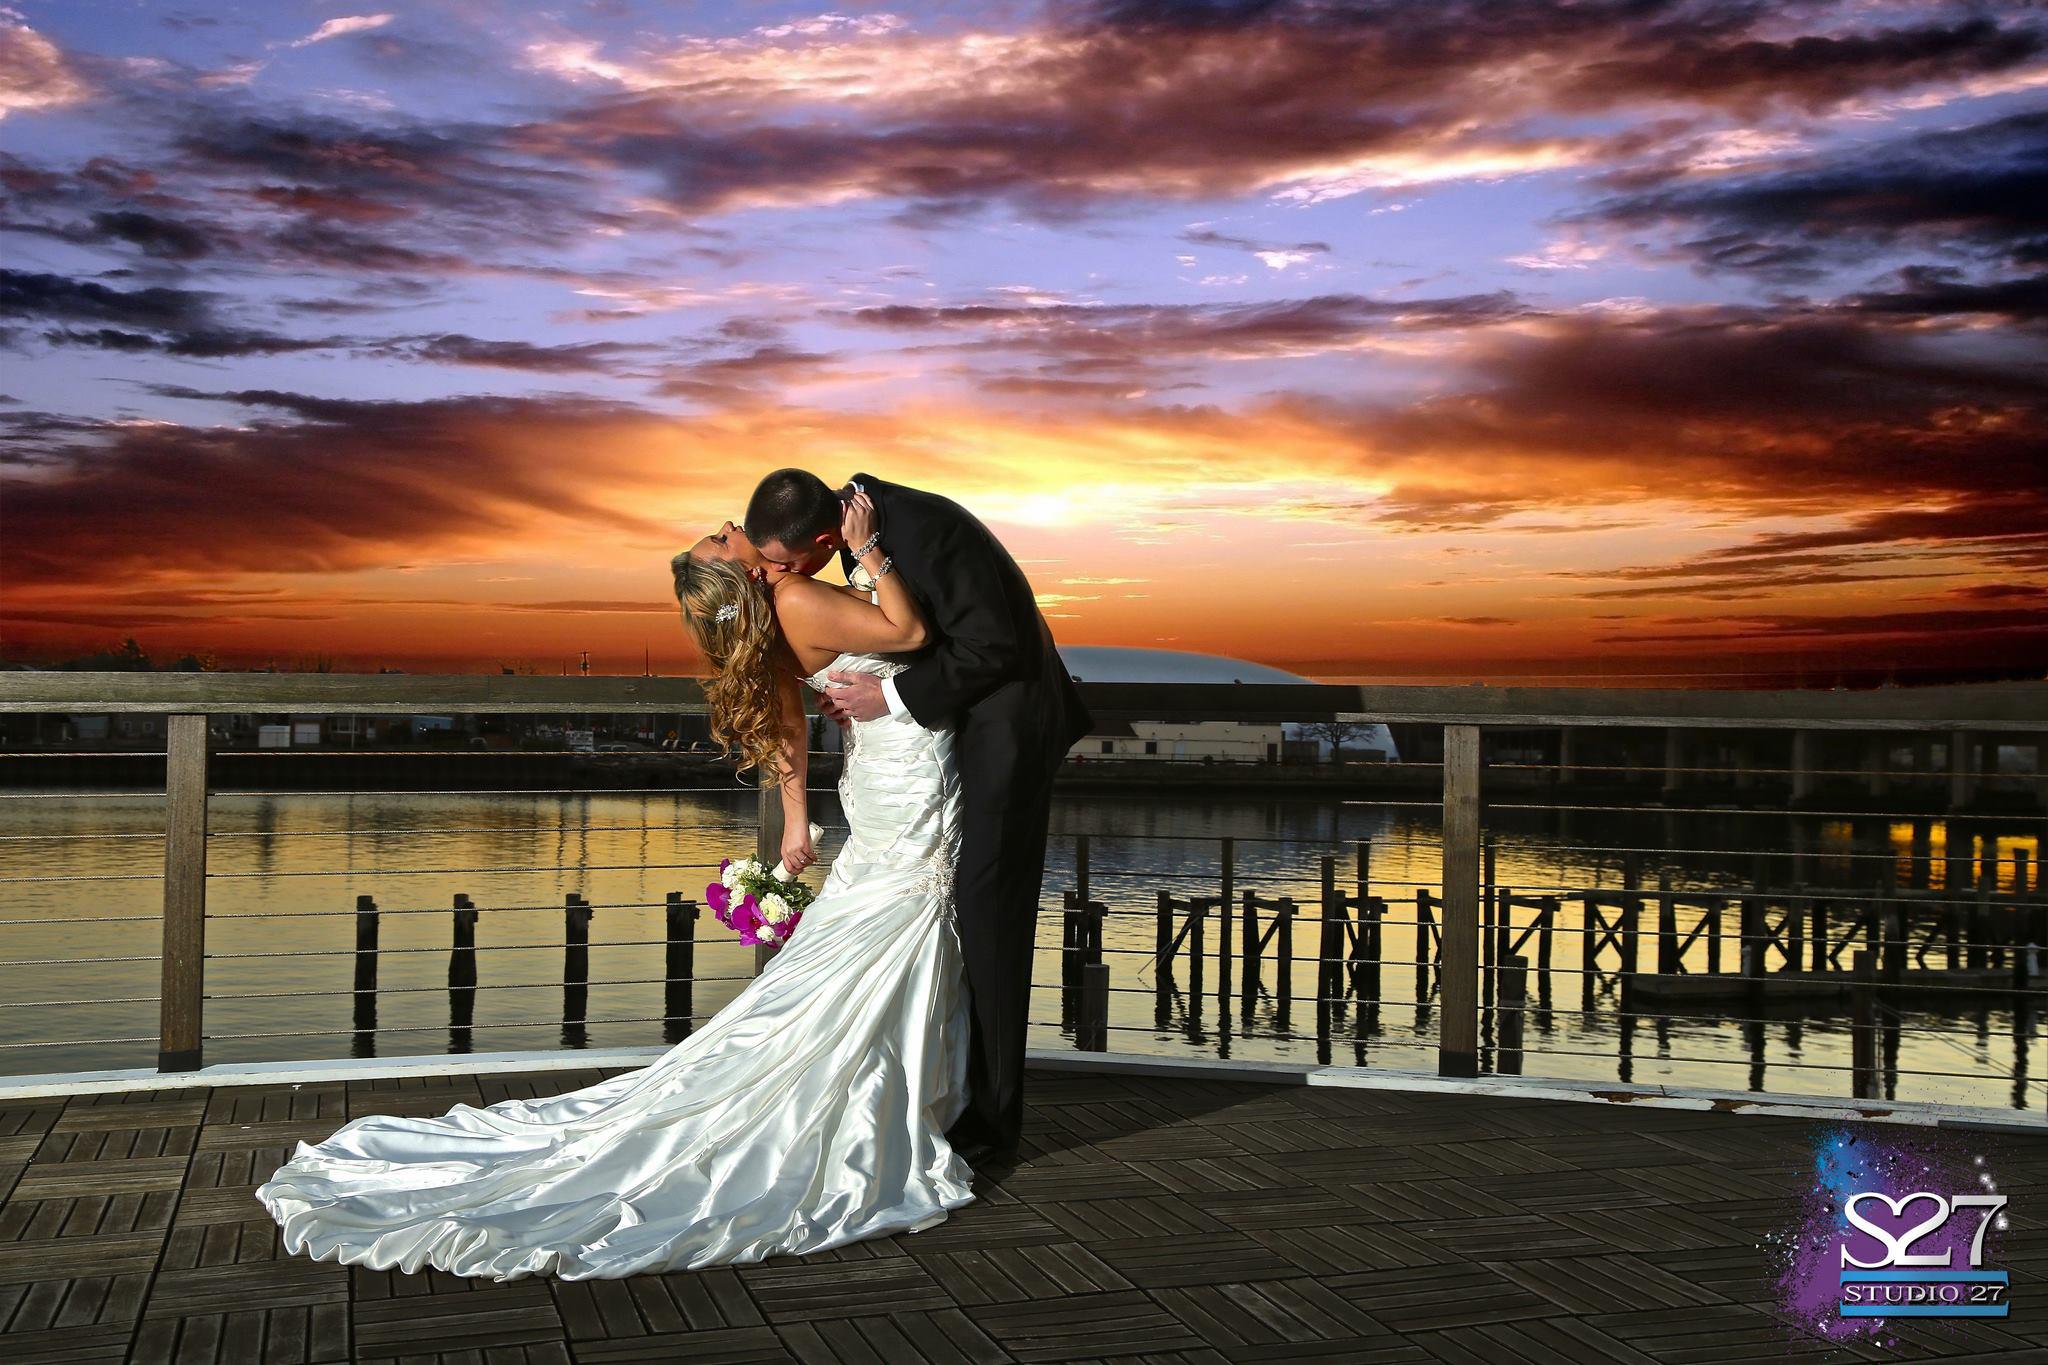 Destination Weddings at Home:  Here on Long Island